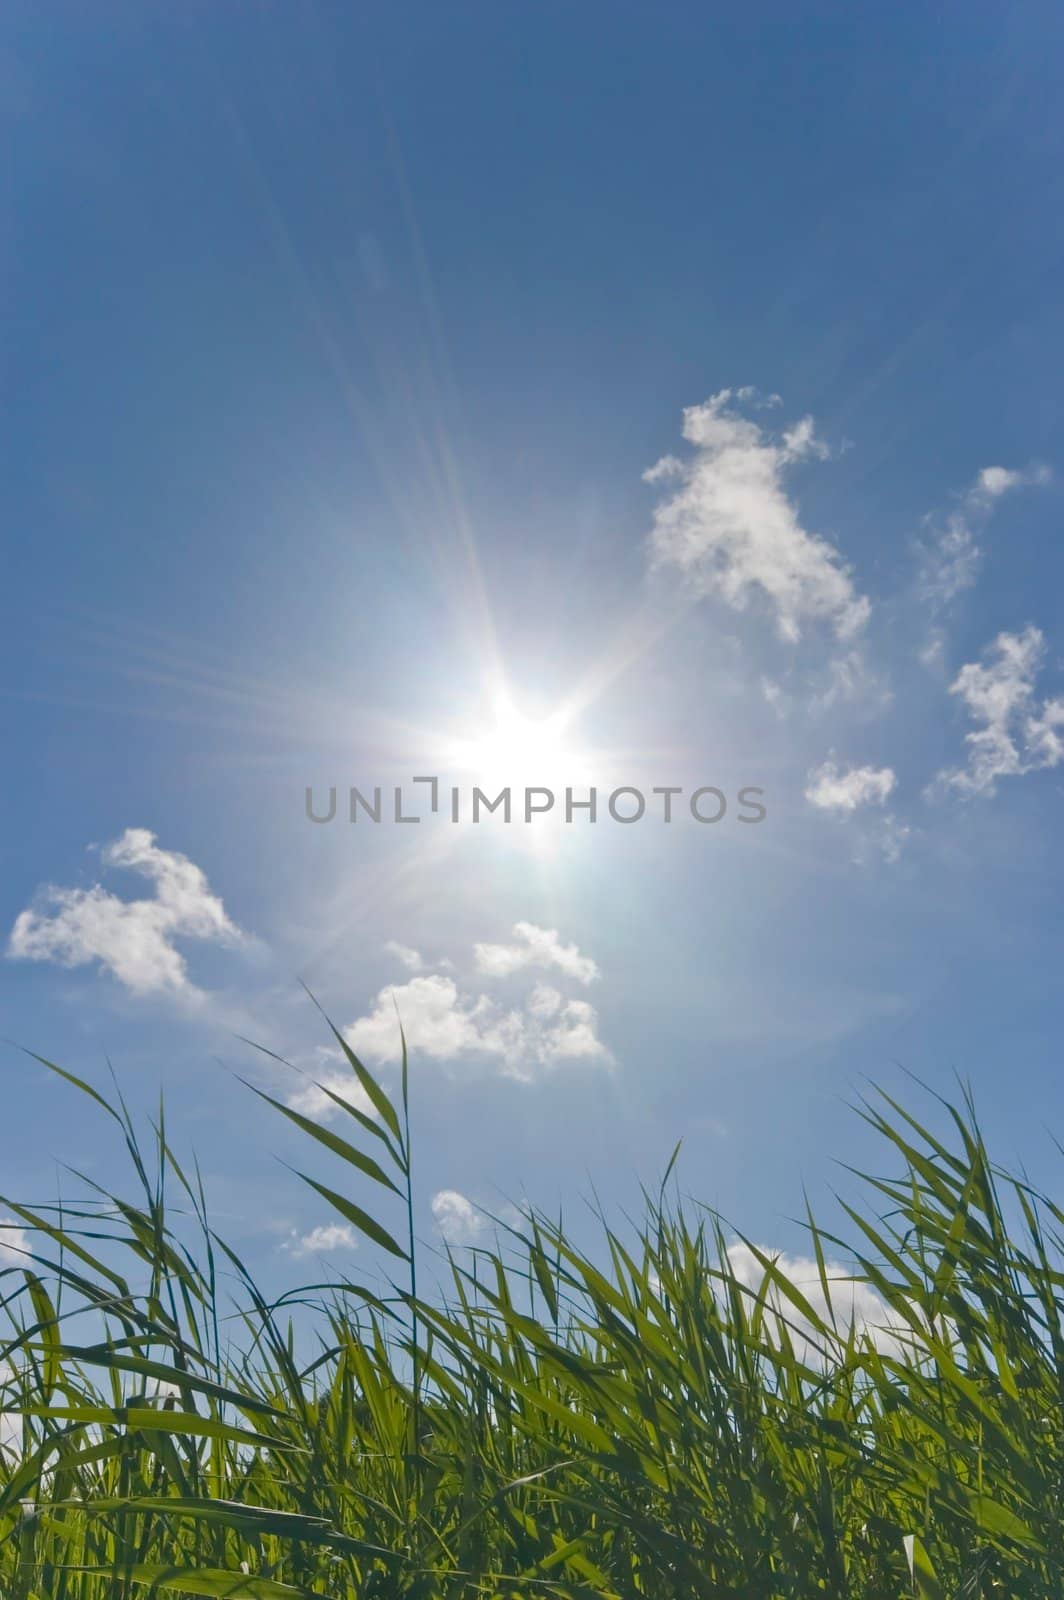 Sunny warm Summer sky with full sun and some grass in the foreground